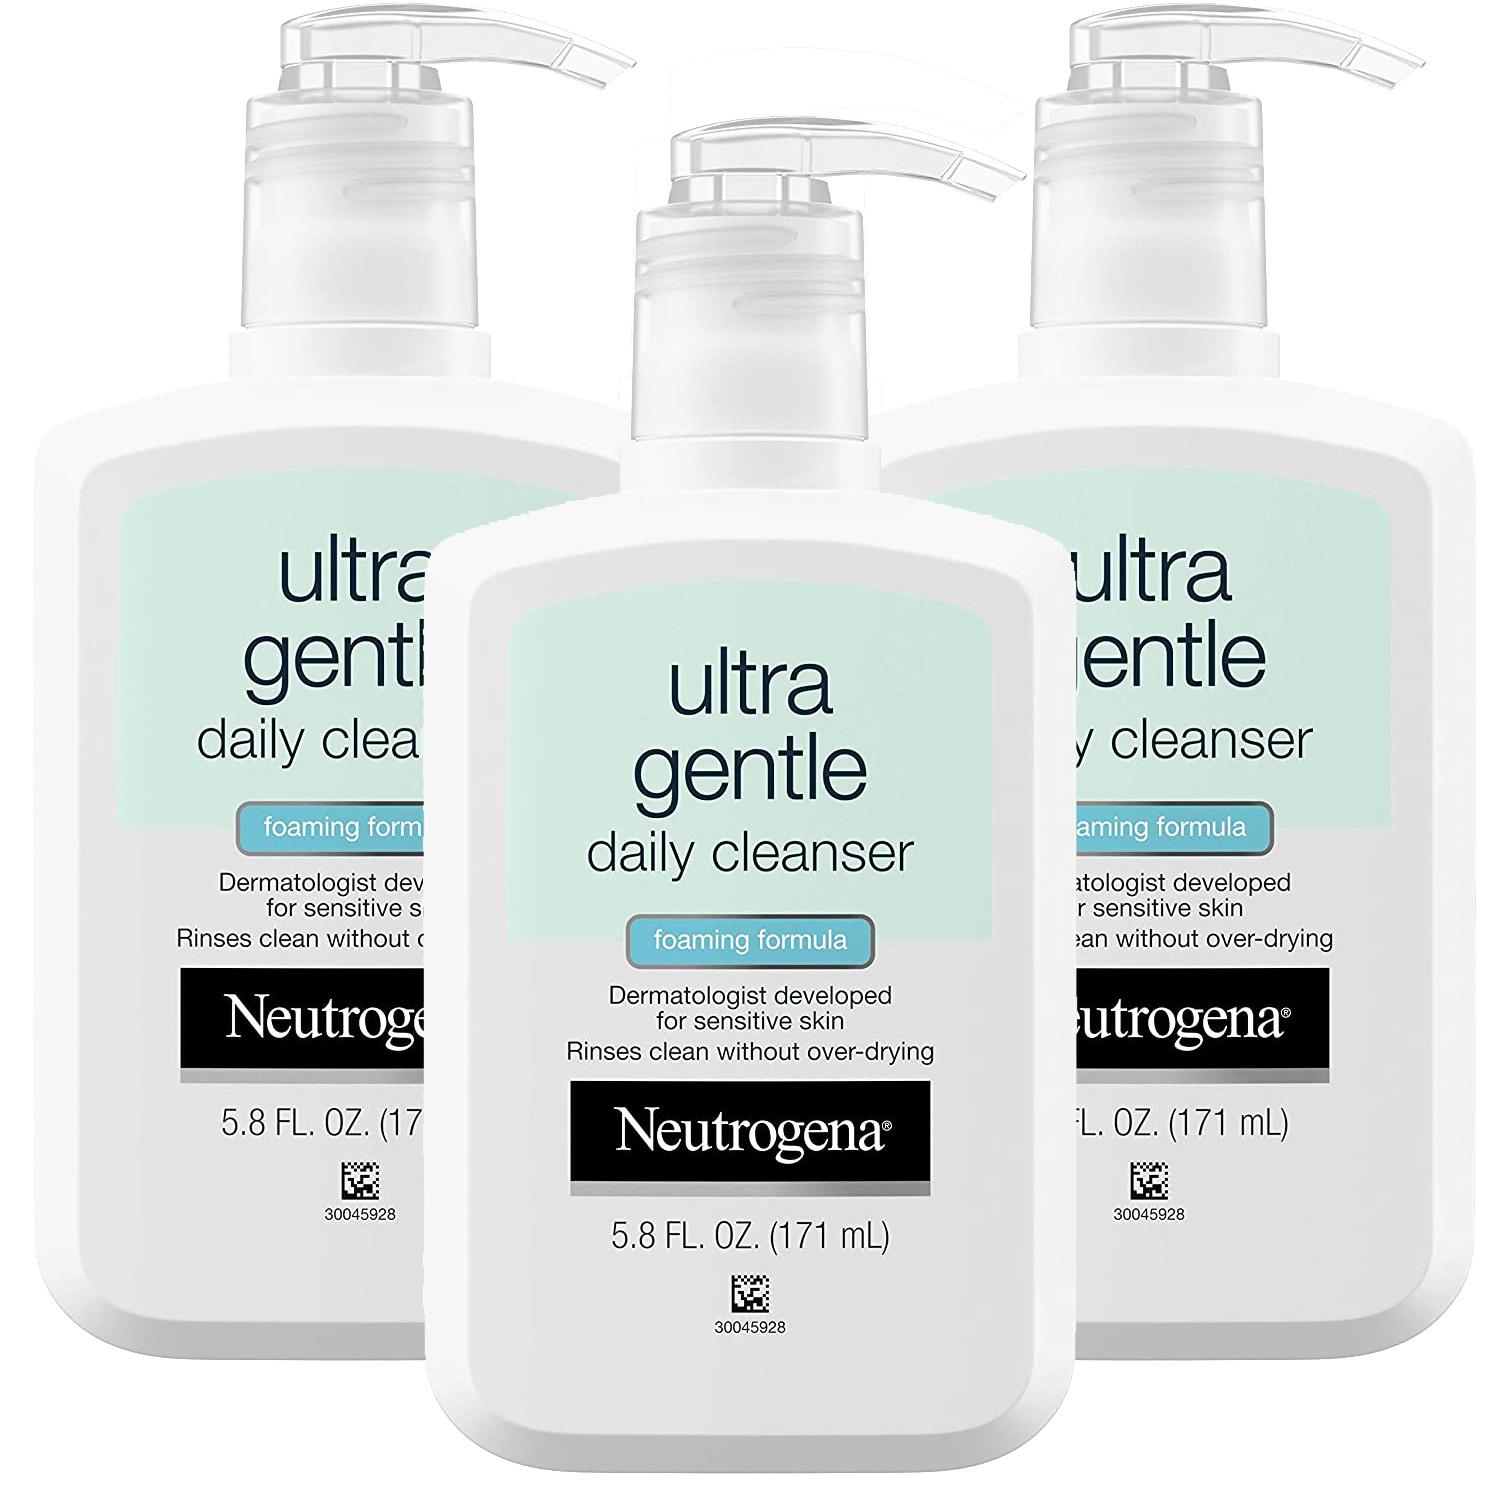 Neutrogena Ultra Gentle Hydrating Daily Facial Cleanser 3 Pack for $10.16 Shipped